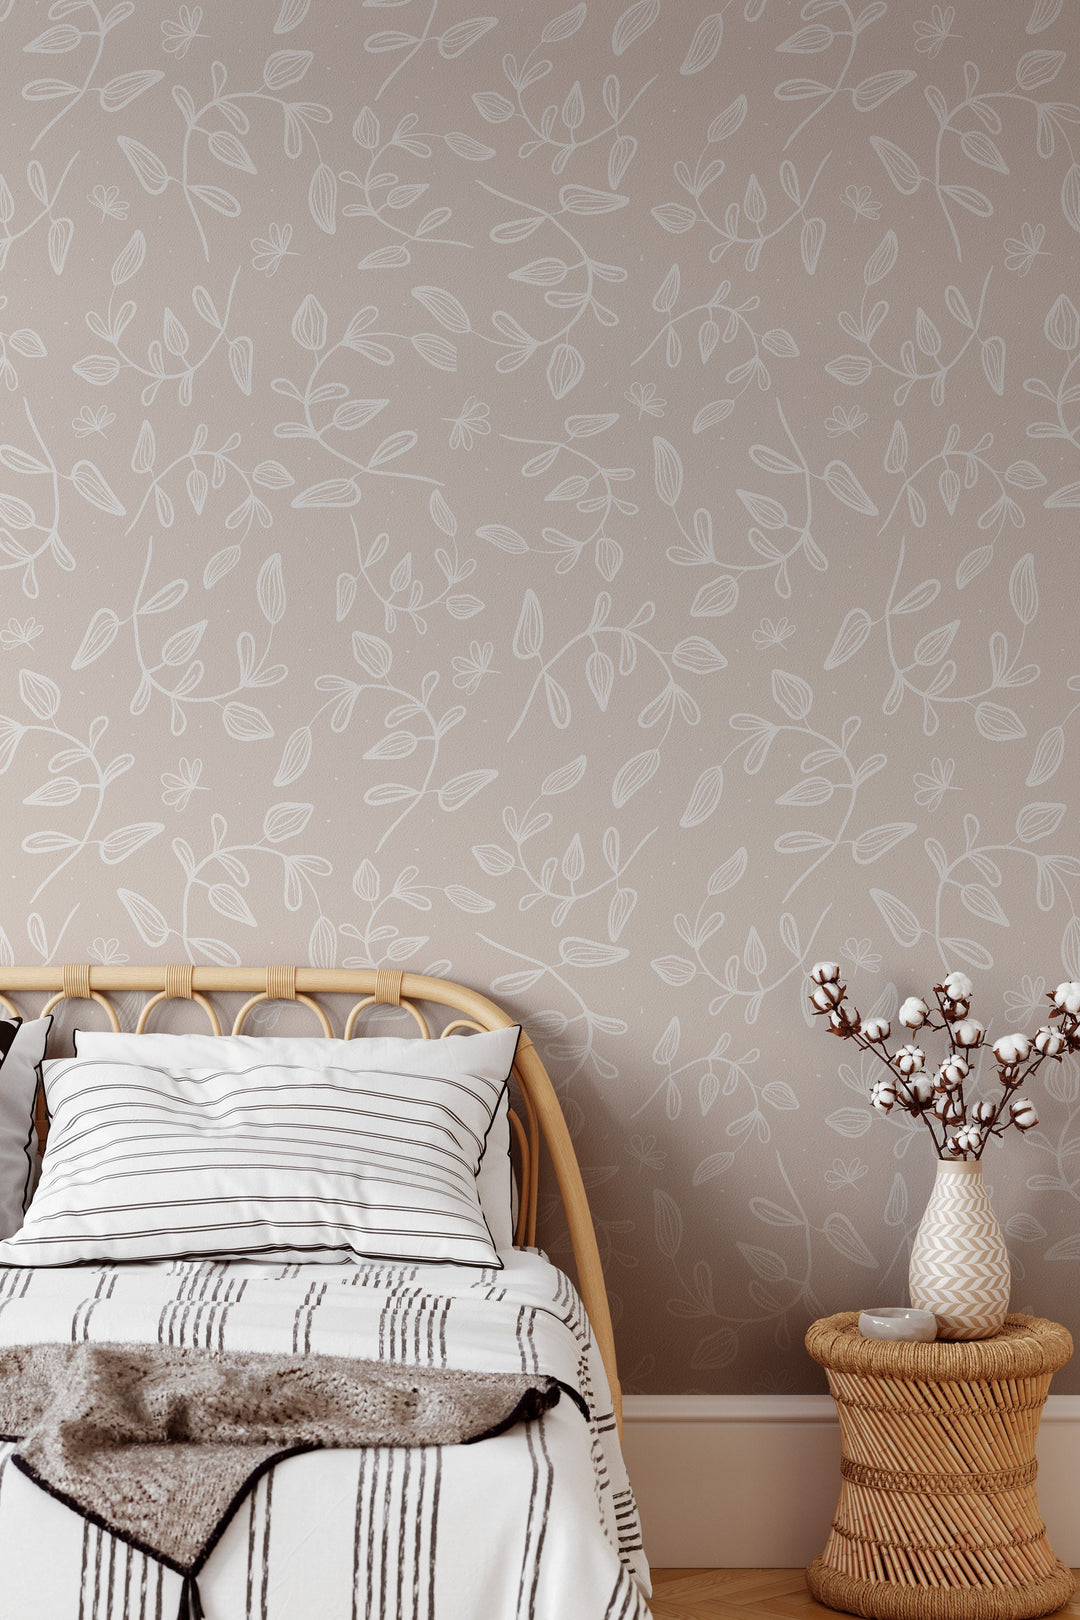 Minimalistic Patterns of Herbs in Botanical Boho Style on a Light Background Wallpaper #53435